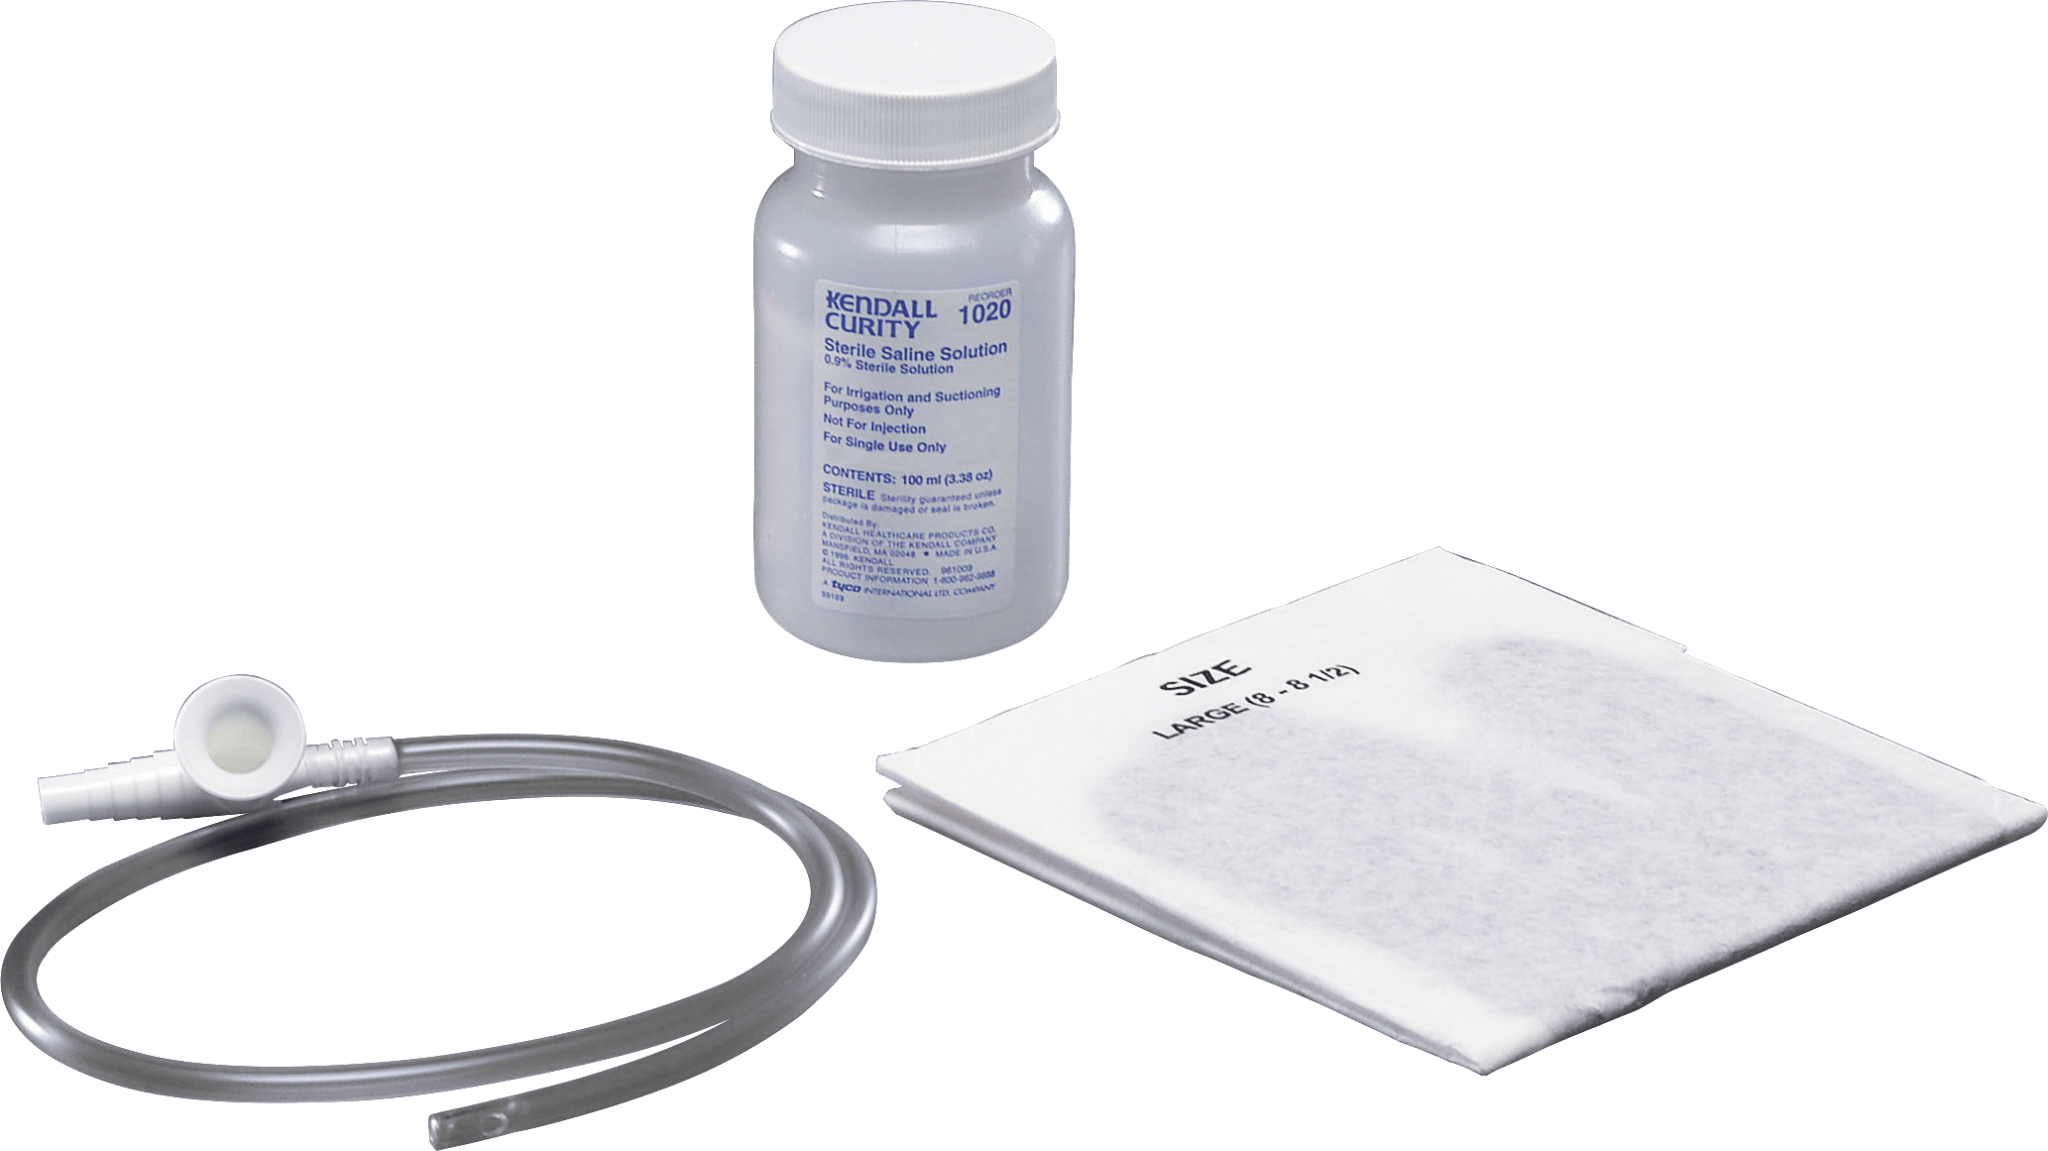 EA/1 - Kendall Graduated Suction Catheter Kit with Safe-T-Vac&trade; Valve, Gloves, Sterile Saline, DeLee Pediatric Tip, 8Fr - Best Buy Medical Supplies